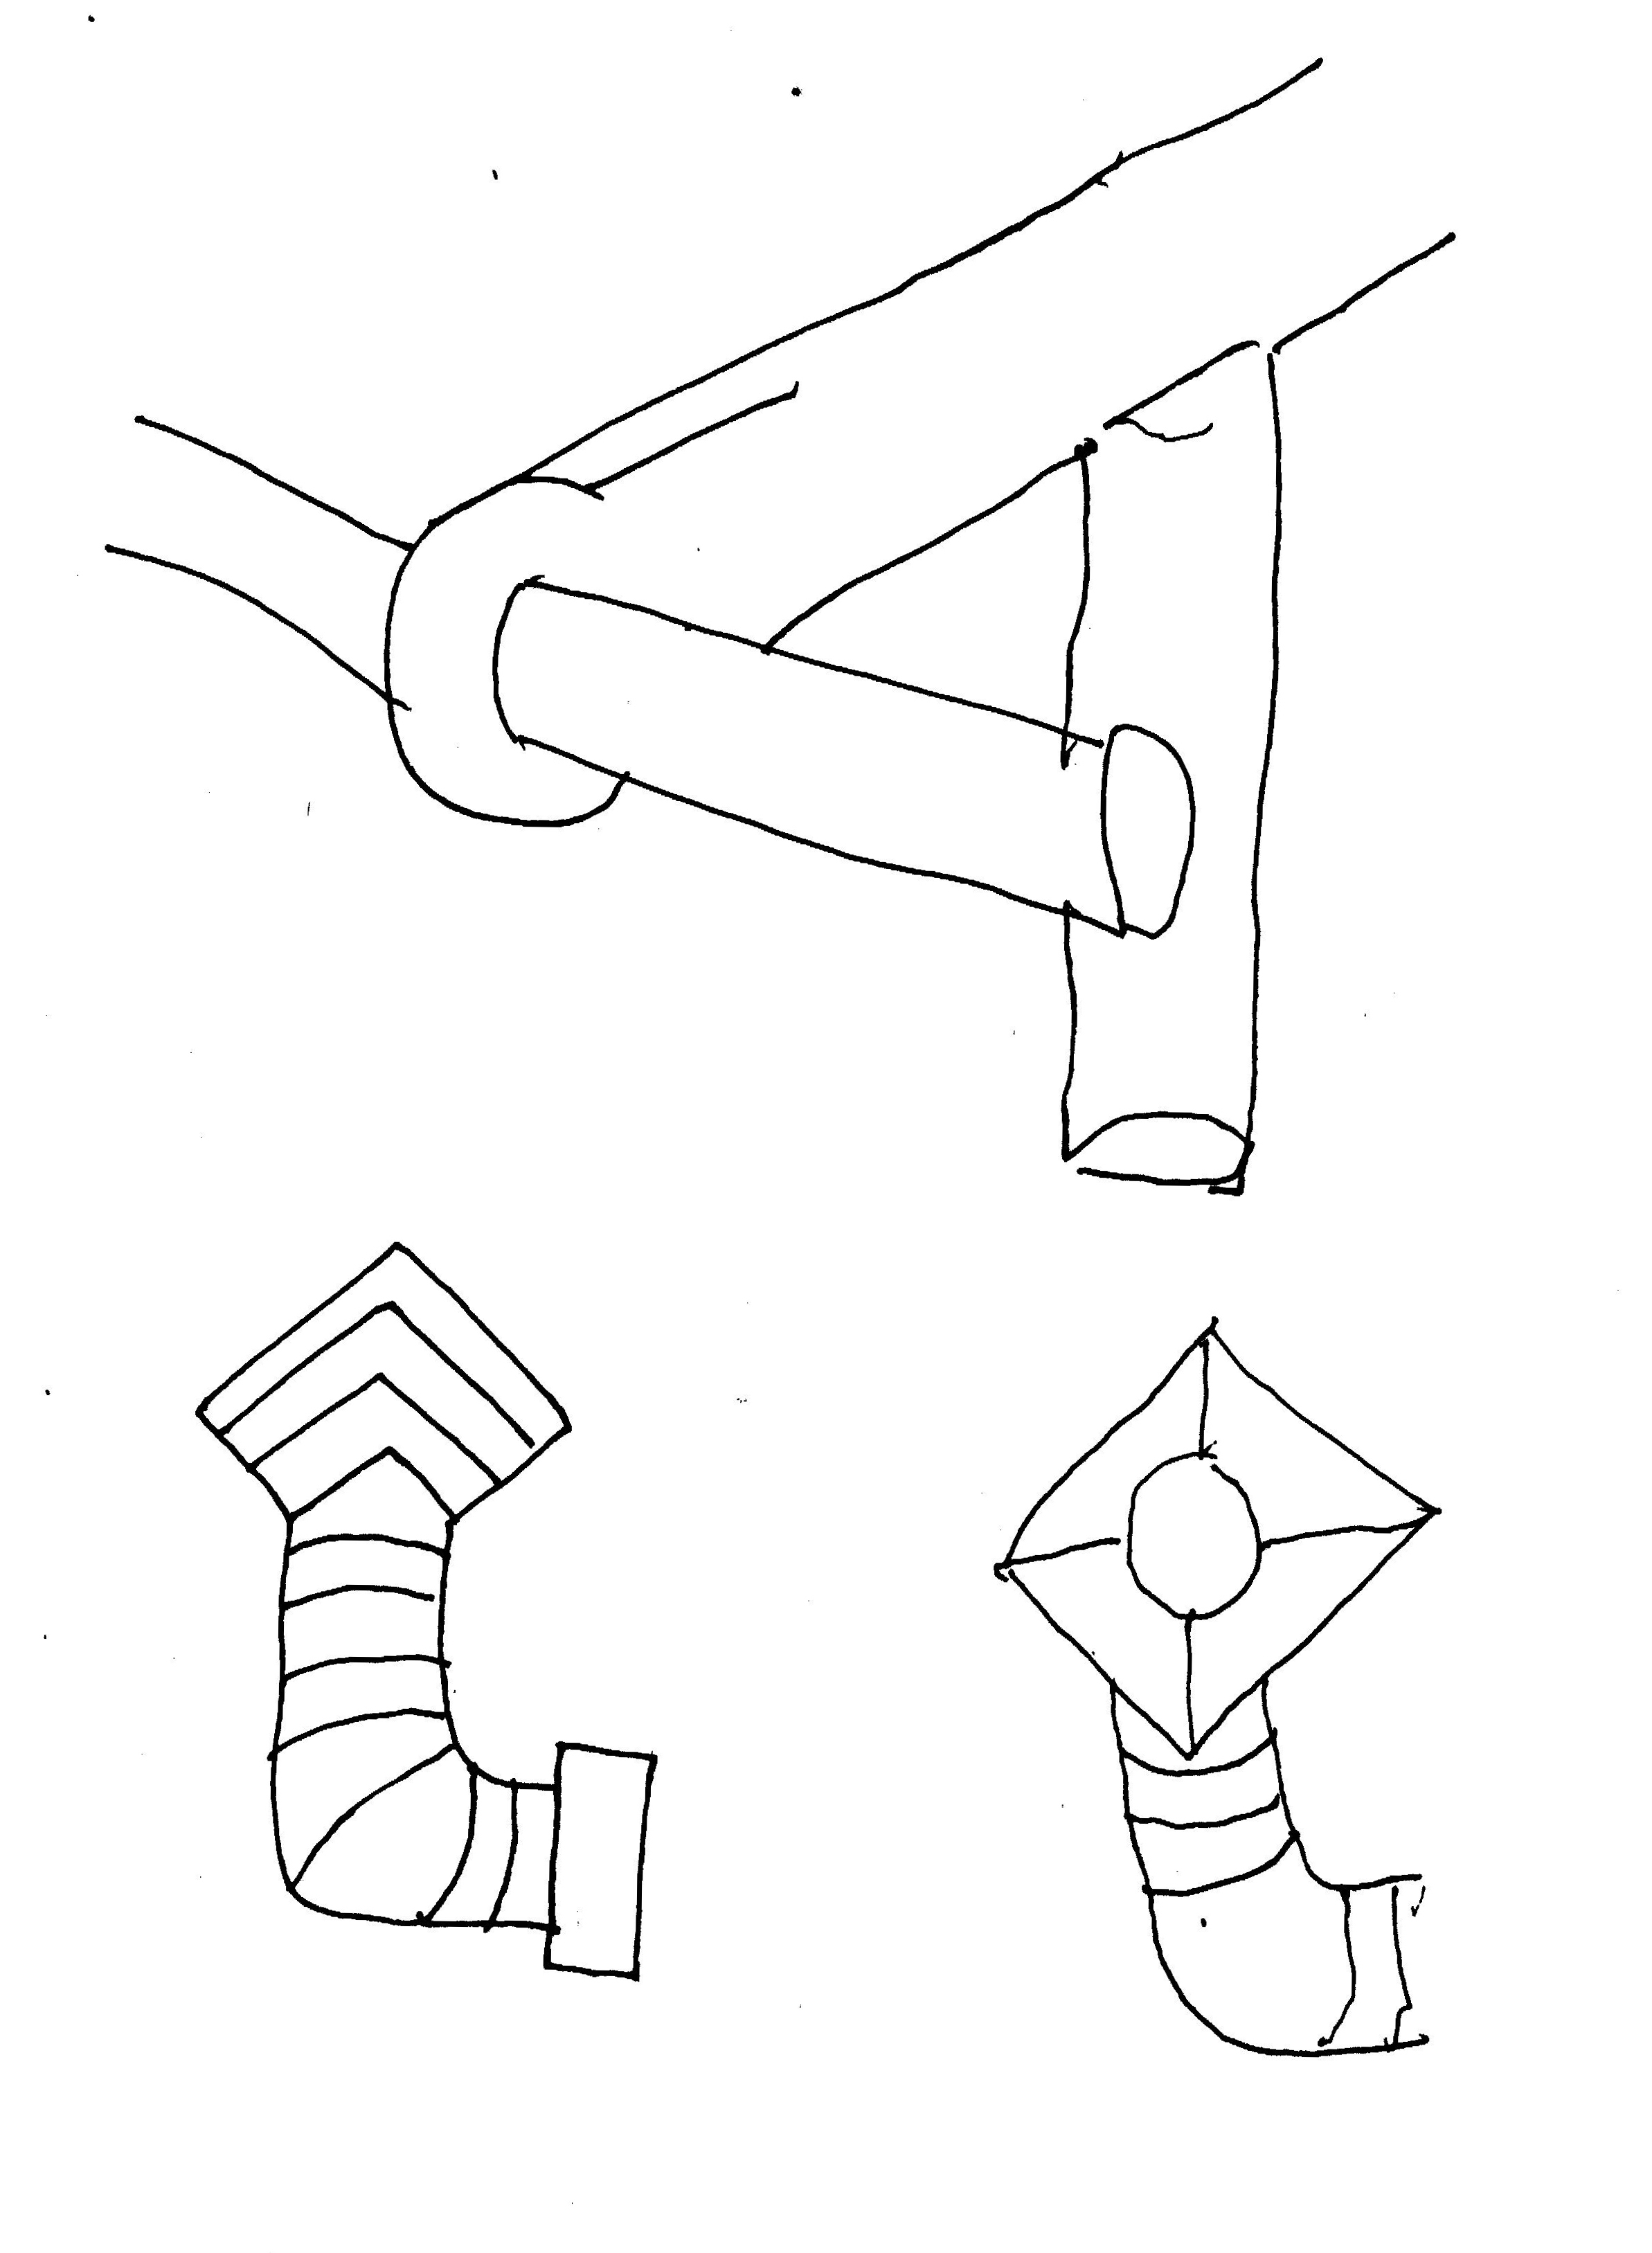 pen drawing of tubes and ducts